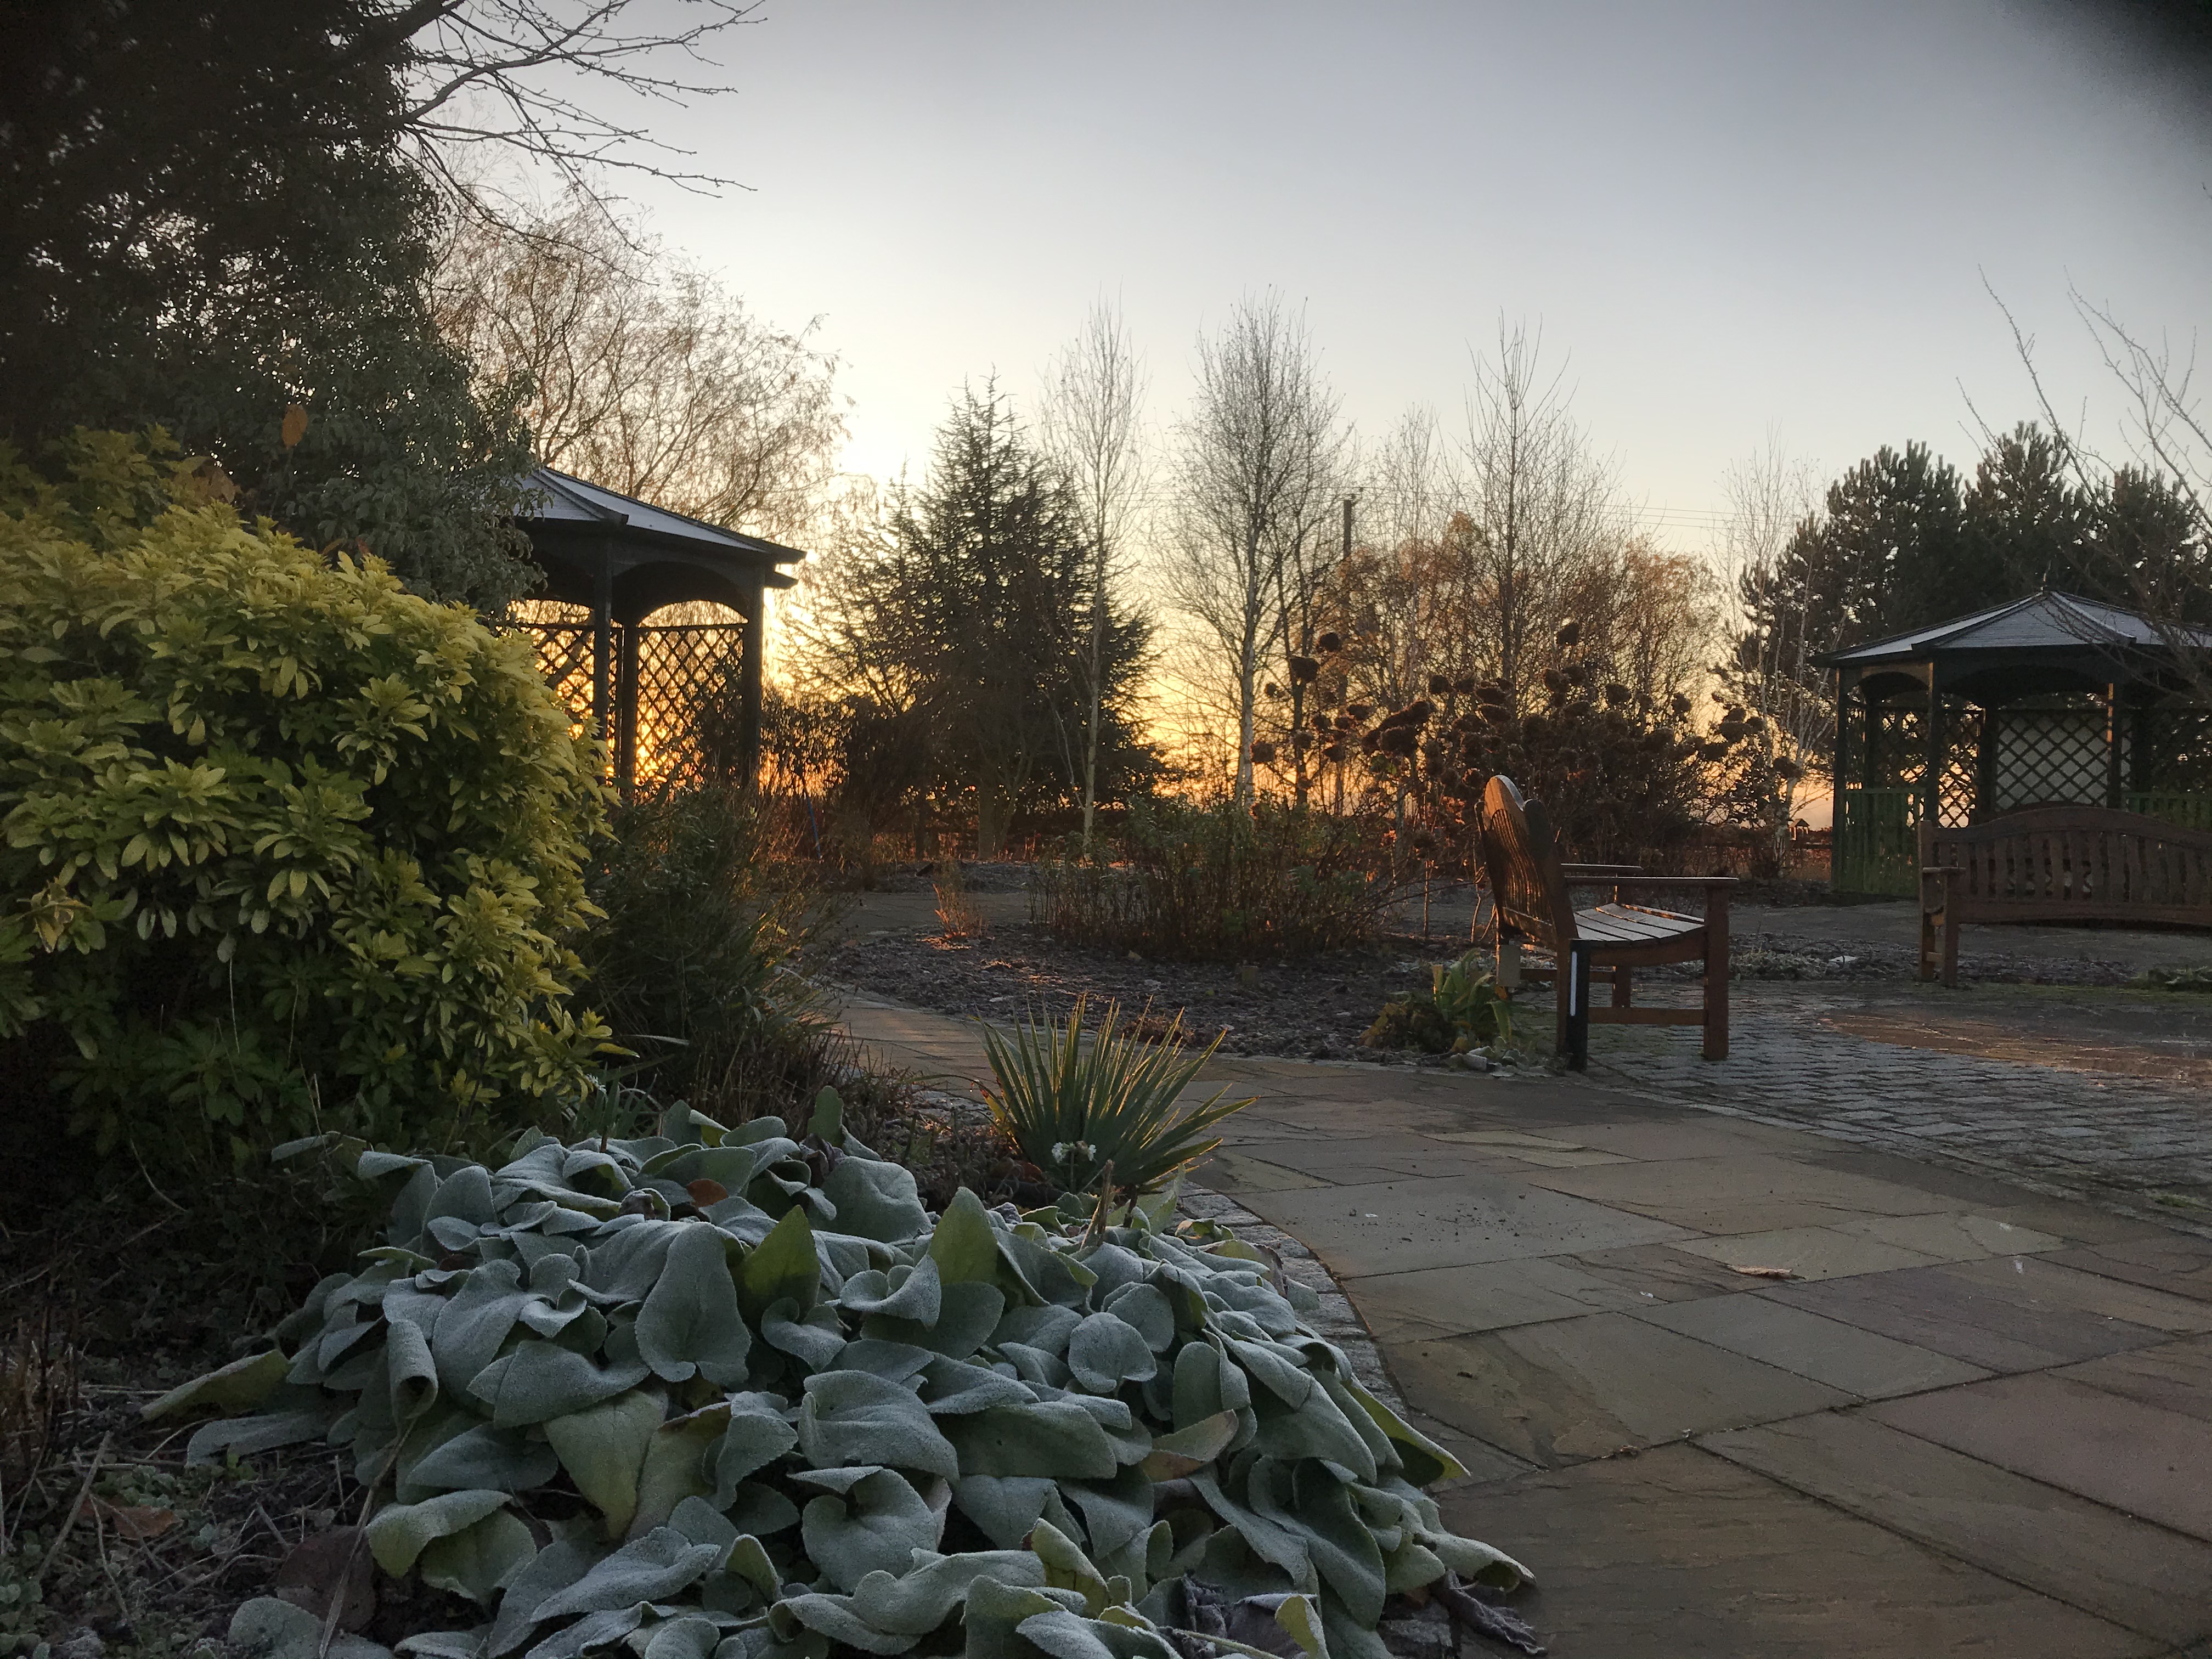 The sun rises over the garden of tranquillity on a frosty morning.